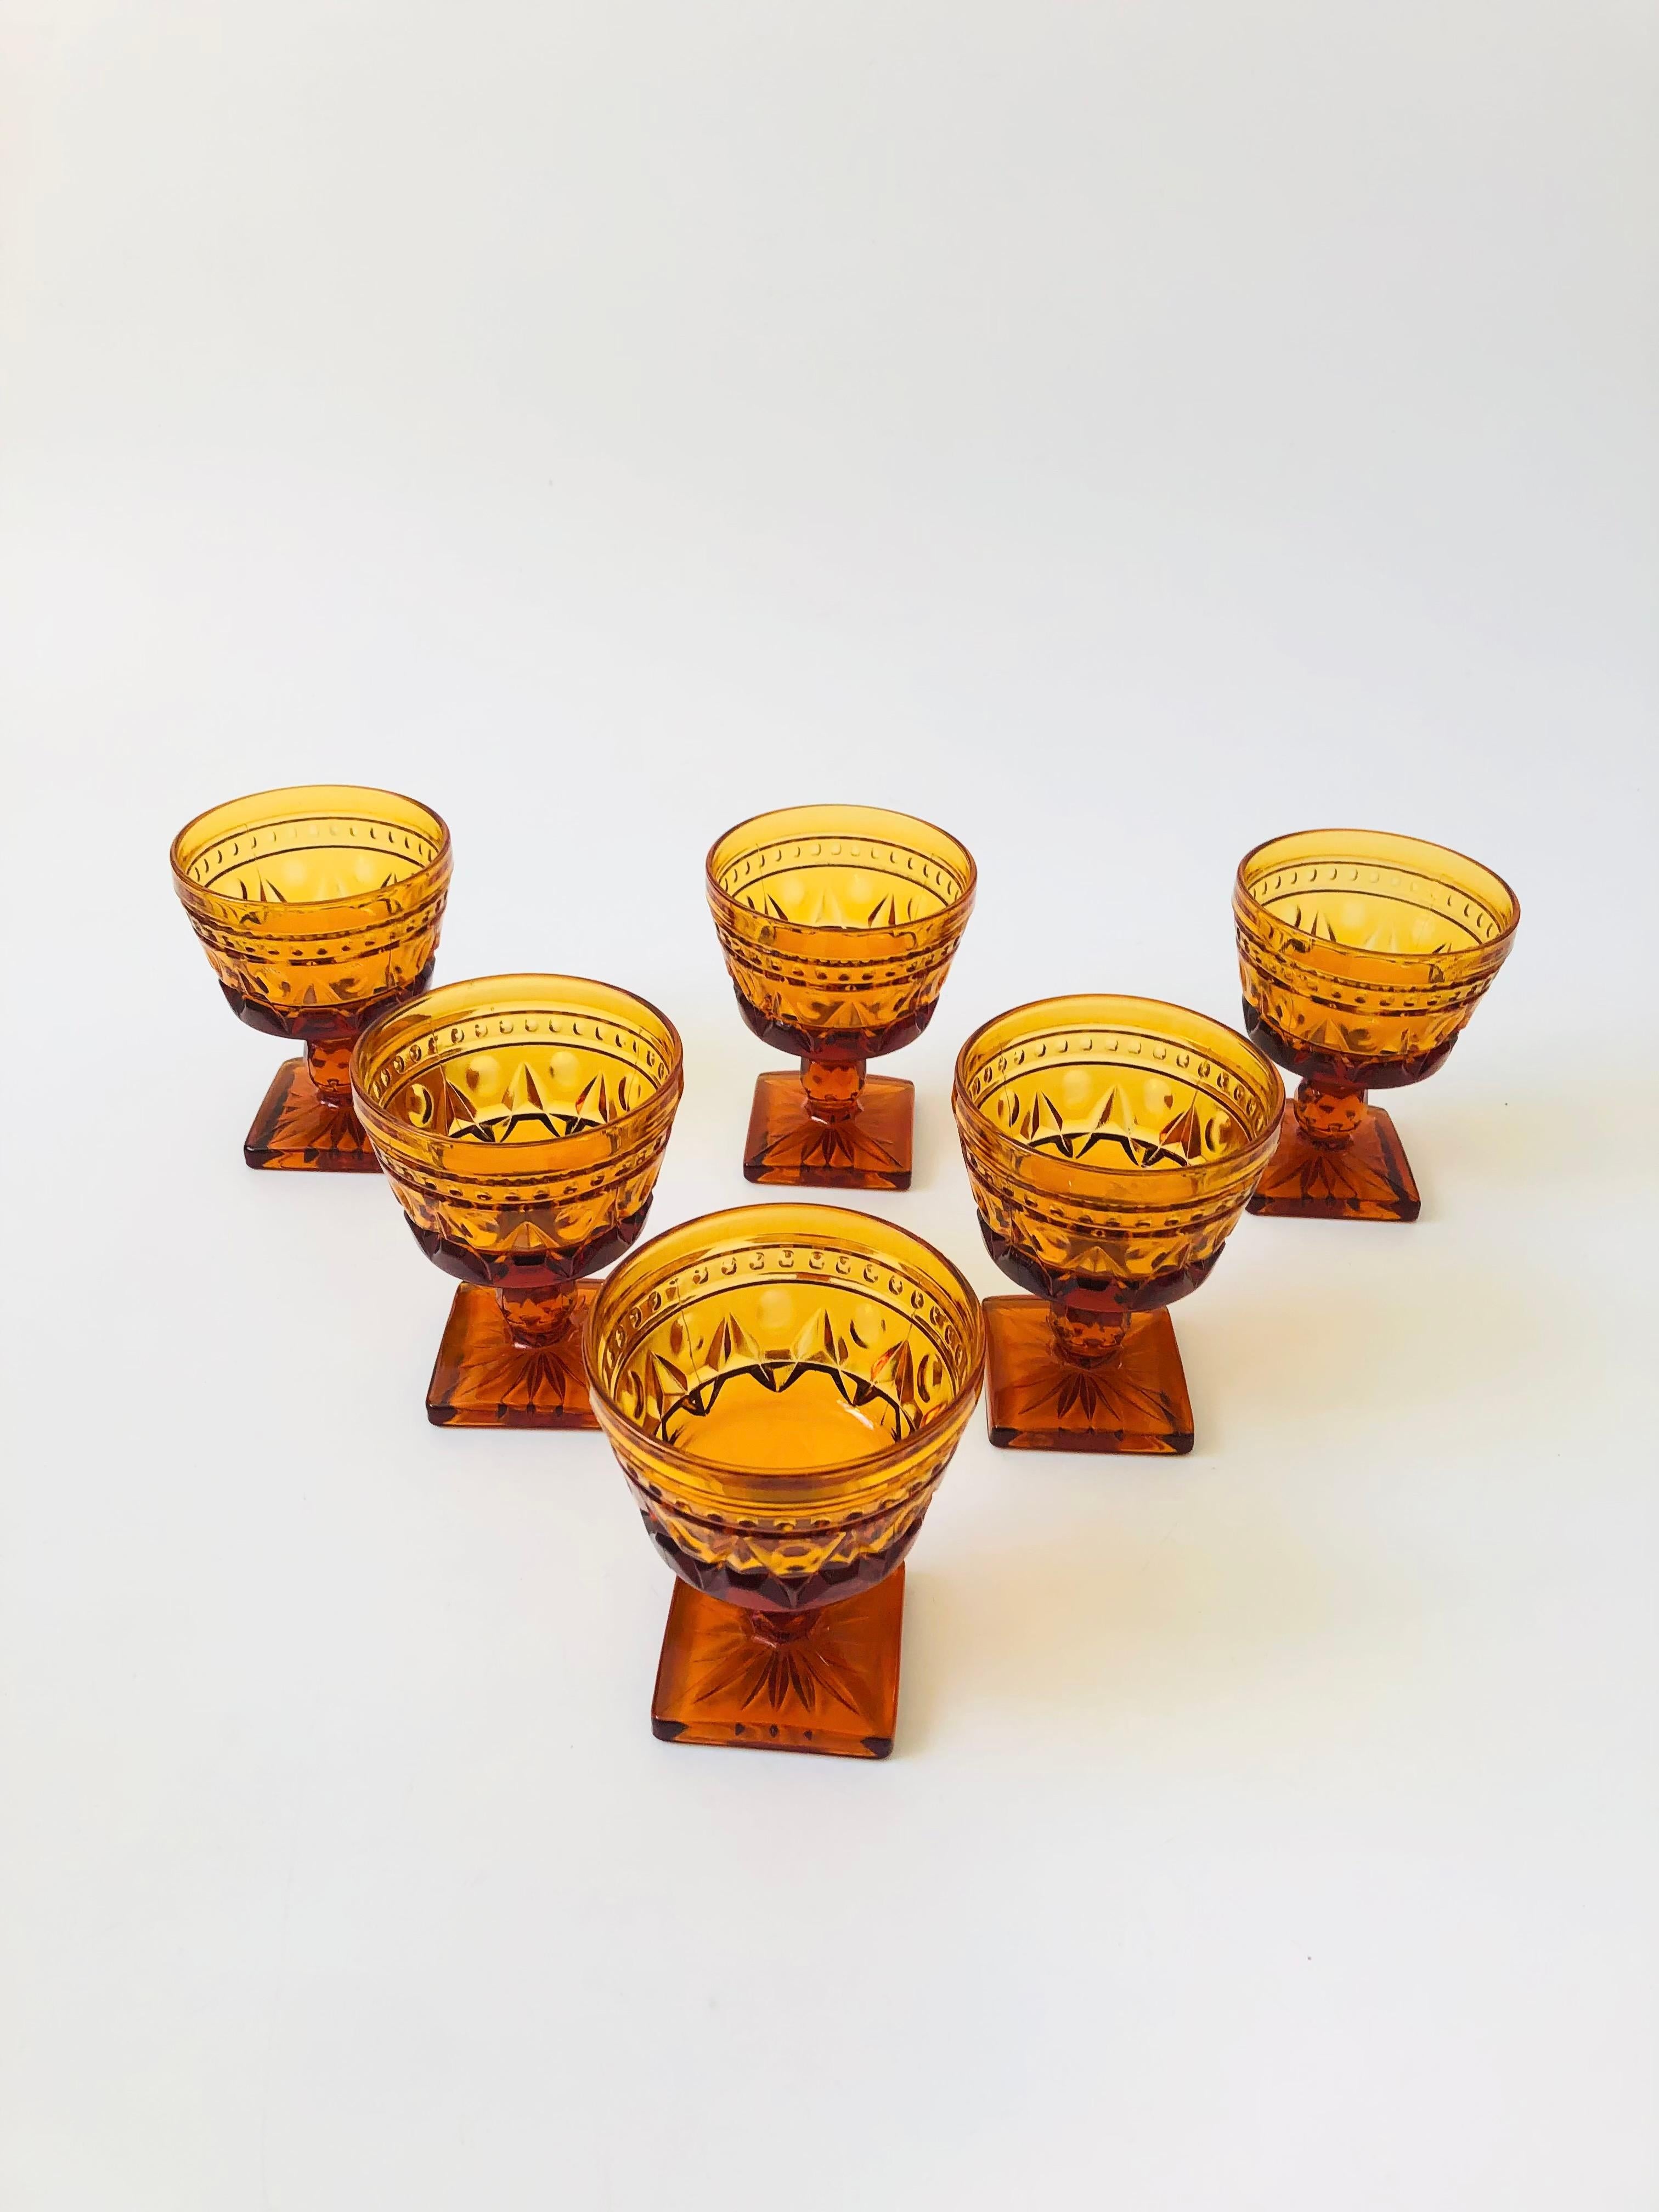 A set of 6 gorgeous coupe glasses with a lovely ornate design in amber glass. Made in the 